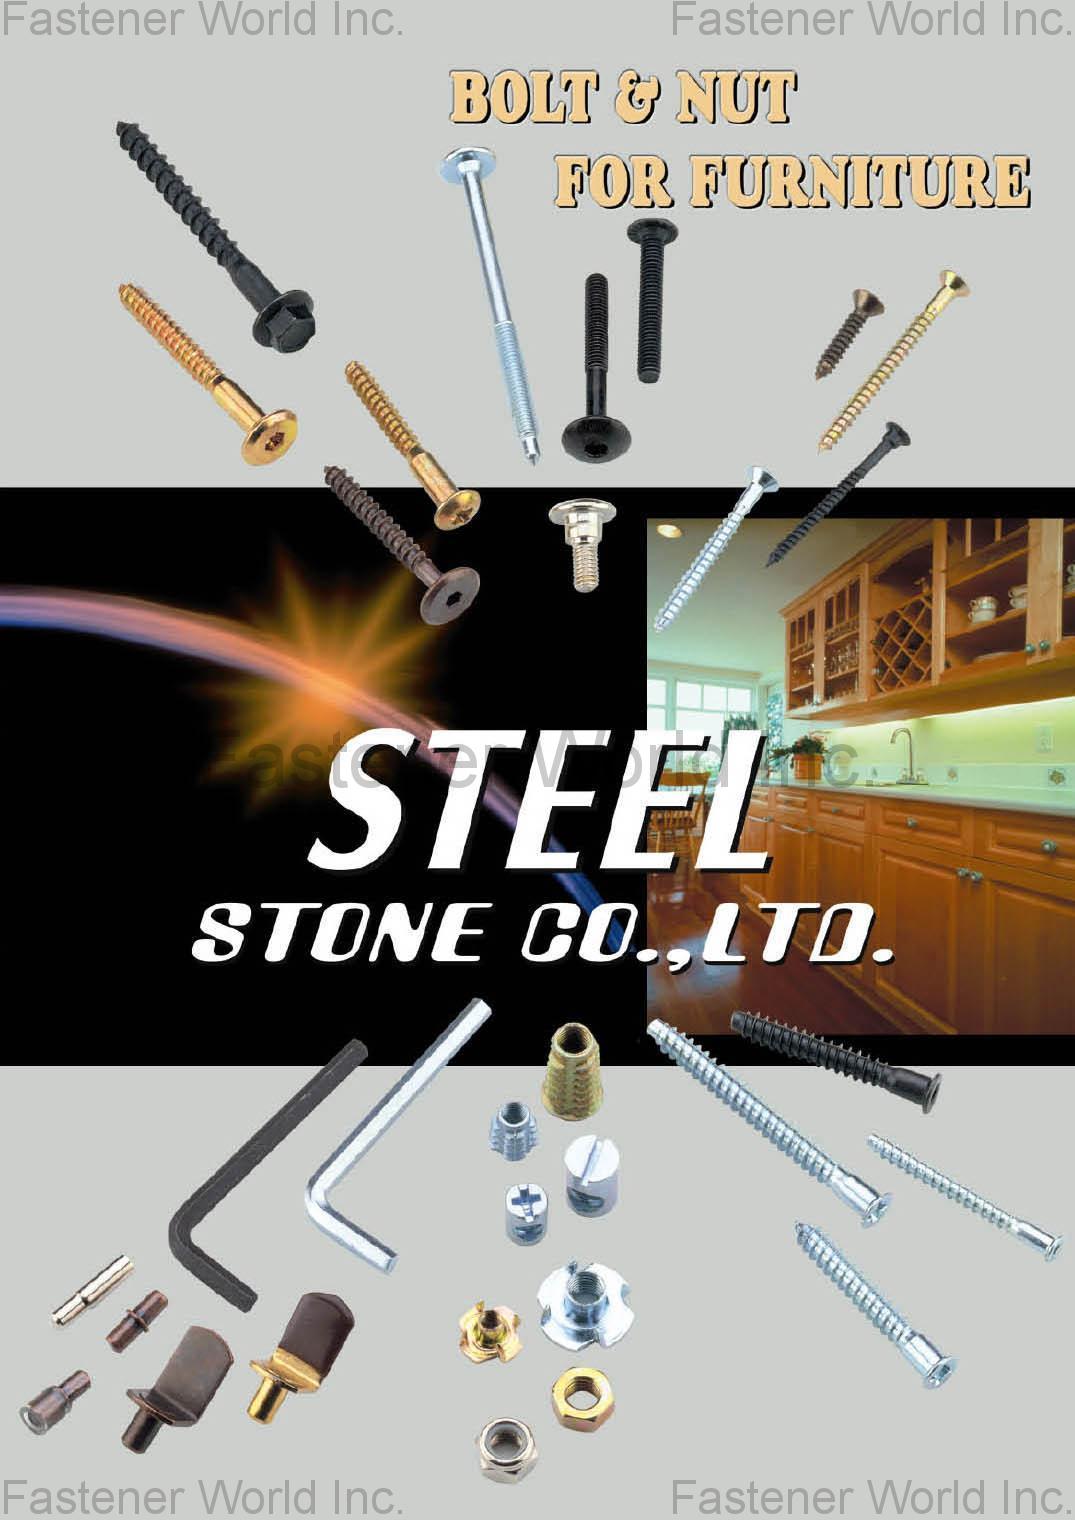 STEEL STONE CO., LTD.  , CONFIRMAT SCREWS, KD FITTINGS, JOINT CONNECTOR BOLTS, JOINT CONNECTOR NUTS, CHIPBOARD SCREW, PARTICLE BOARD SCREW, DRYWALL SCREW, TAPPING SCREW, MACHINE SCREW, EURO SCREW, HANGER BOLT, STUD THREAD ROD, SHELF SUPPORT, INSERT NUT, BARREL NUT, TEE NUT, CUSTOM-MADE PRODUCTS , Furniture Screws